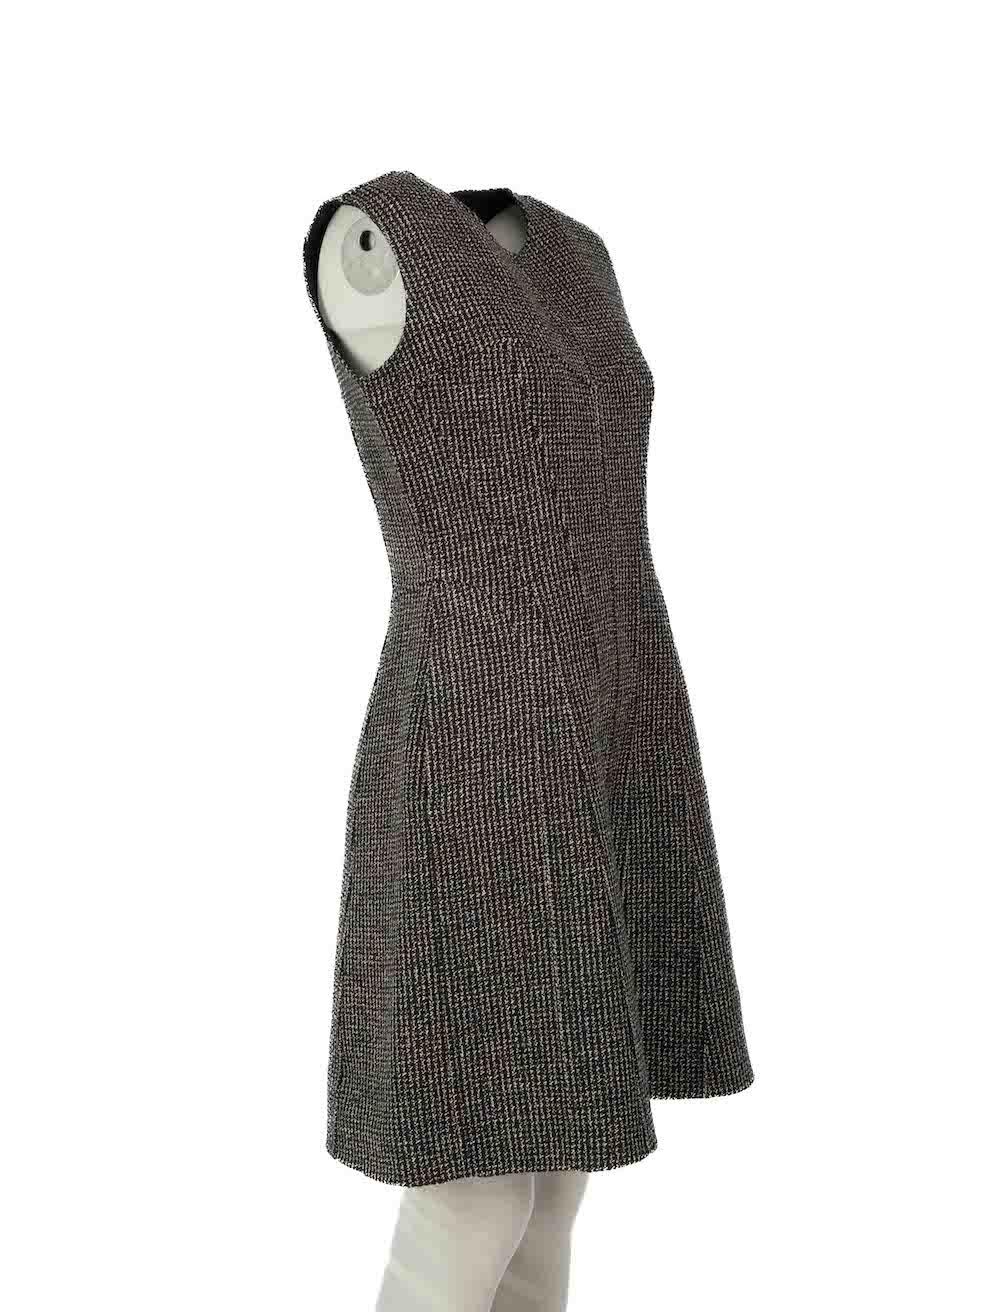 CONDITION is Very good. Hardly any visible wear to dress is evident however neck label has come partially unstitched on this used Christian Dior designer resale item.
 
Details
Black
Wool
Dress
Round neck
Sleeveless
Mini
2x Side pockets
Back zip and